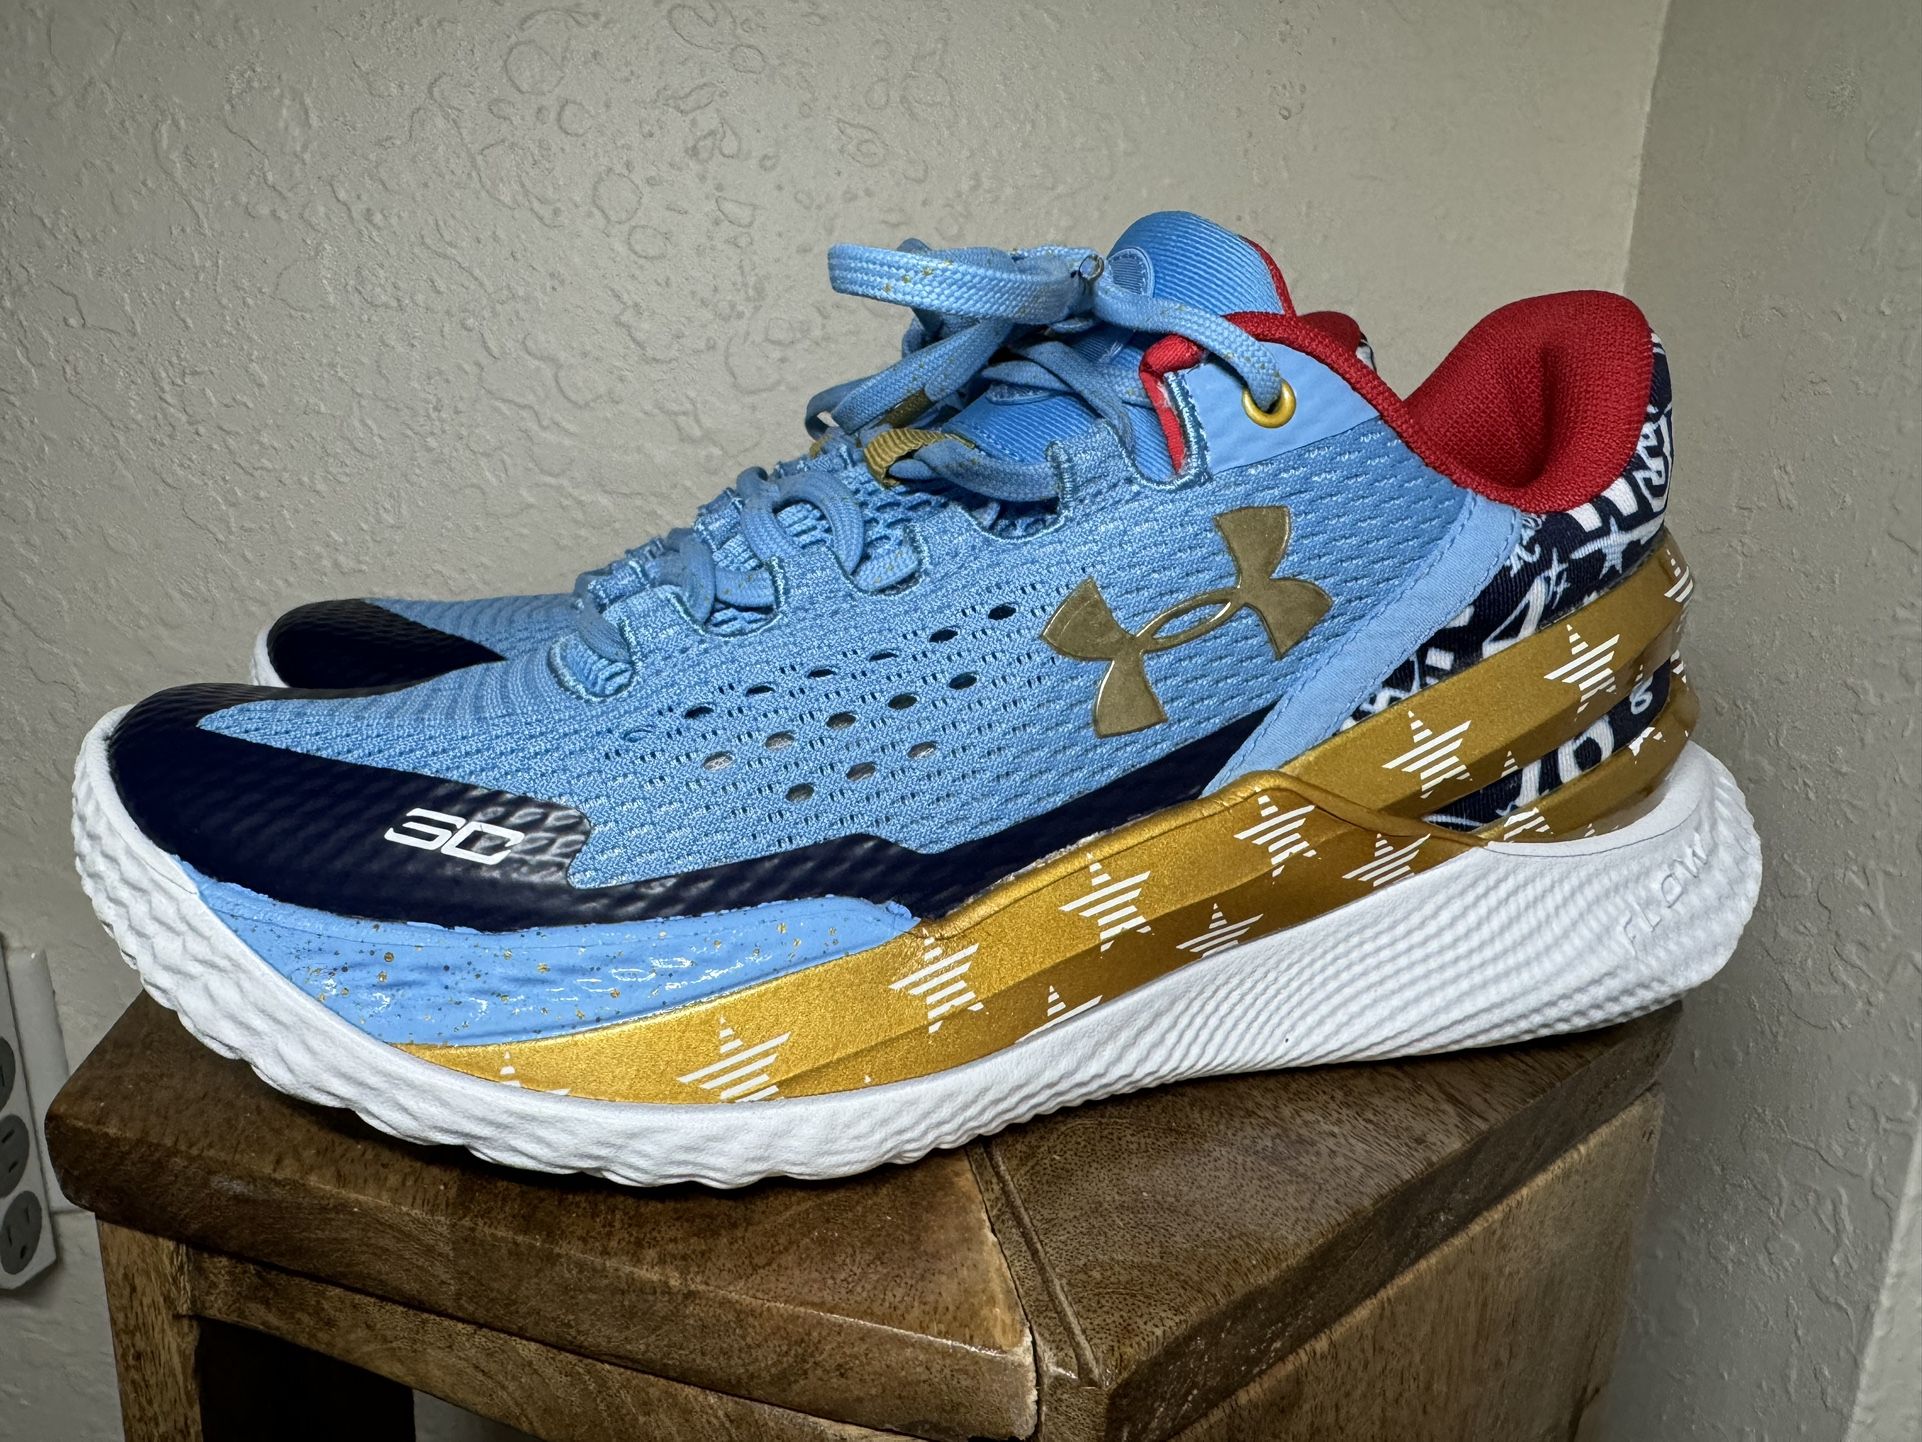 Under Armour Curry 2 Low FloTro Basketball Navy Gold White Size 7 M (contact info removed) 402